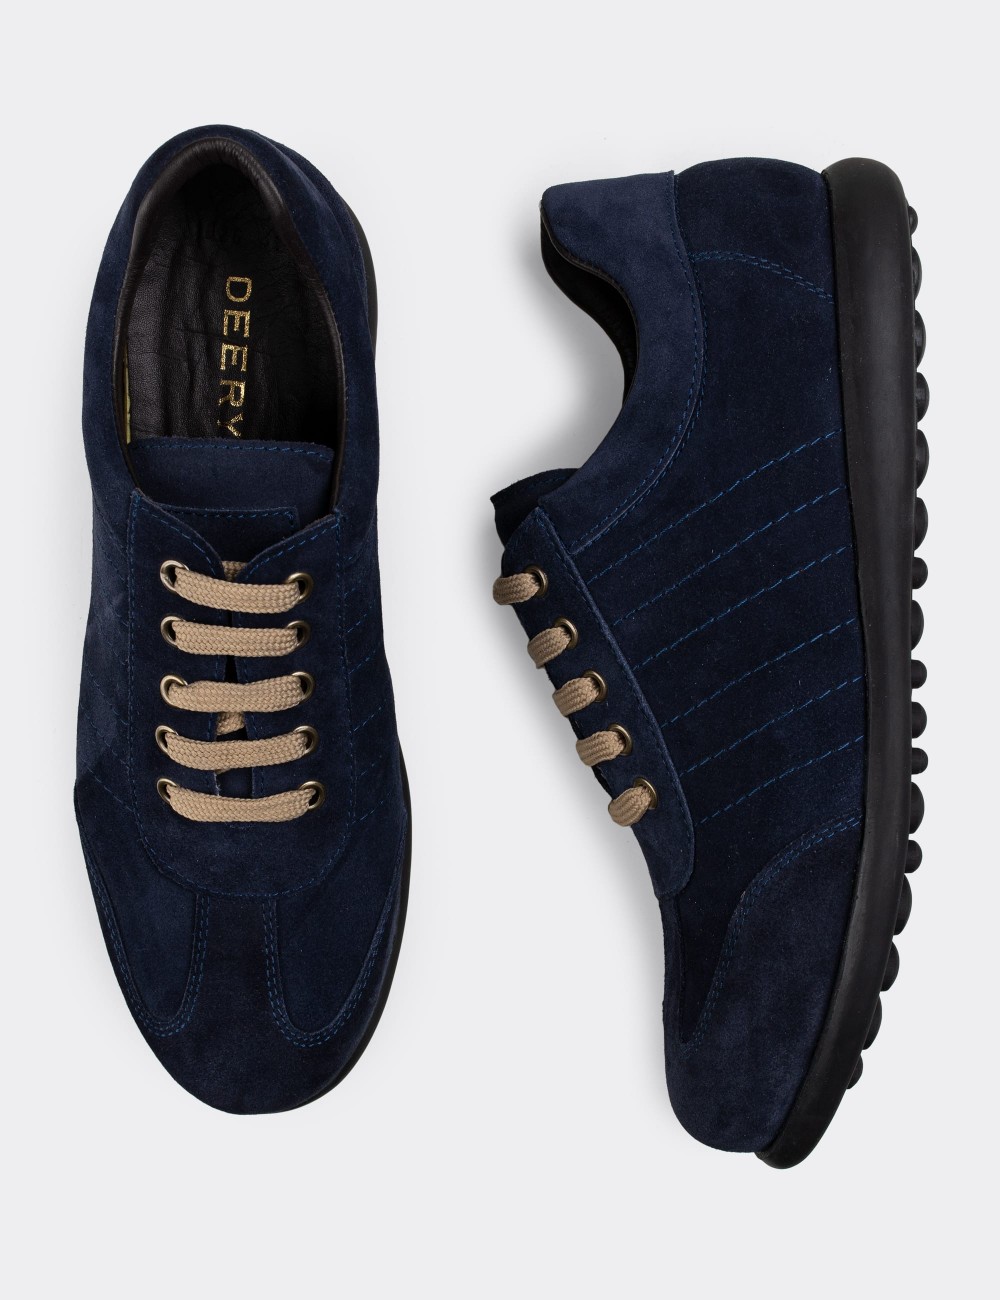 Navy Suede Leather Lace-up Shoes - 01826MLCVC06